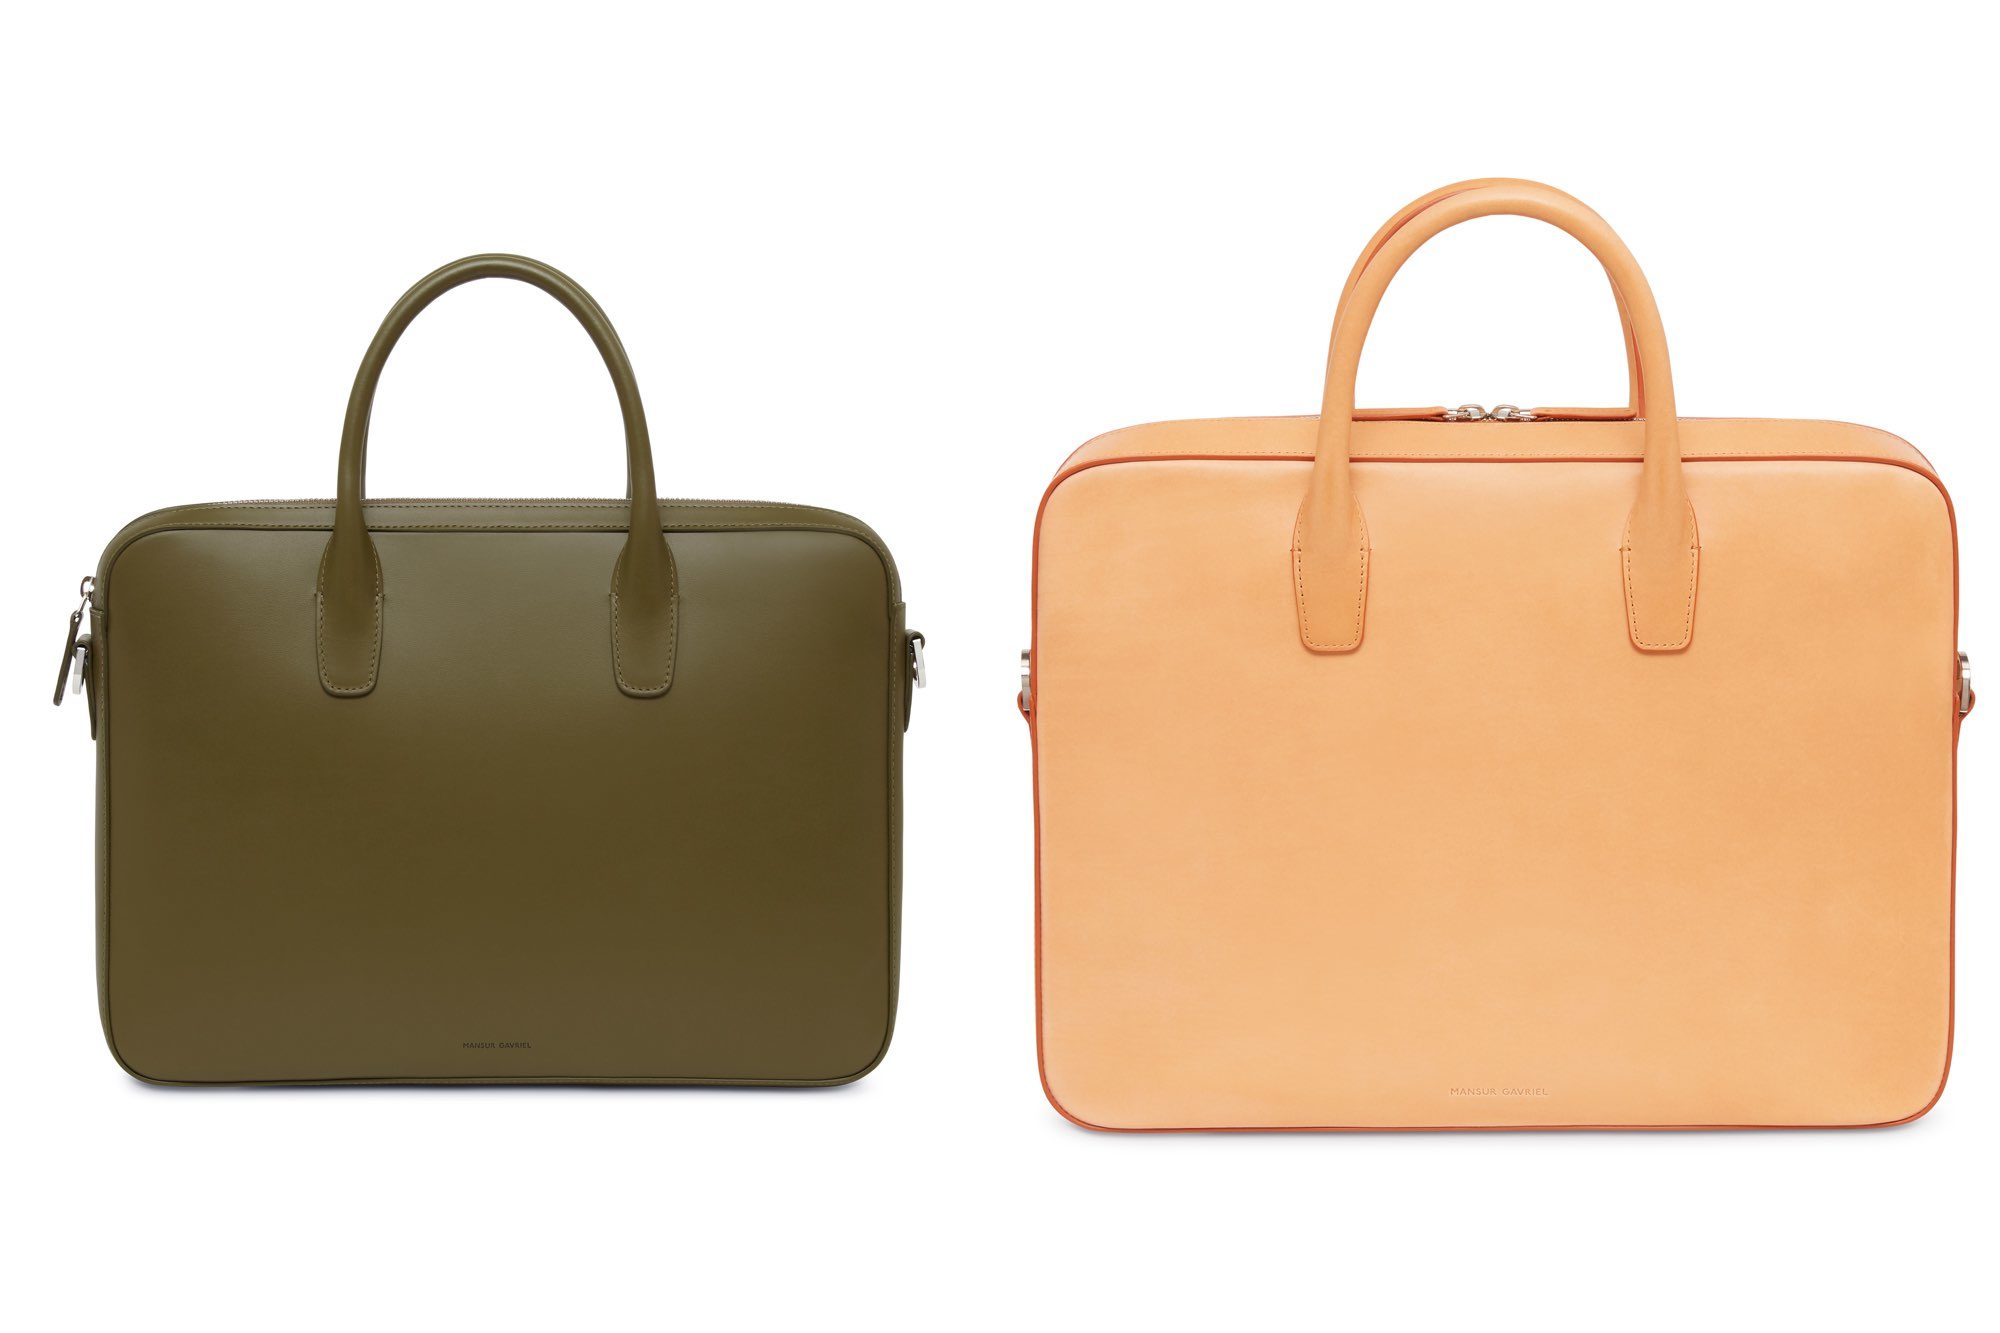 Mansur Gavriel’s Men’s Collection Is the Same as Its Women’s Collection ...